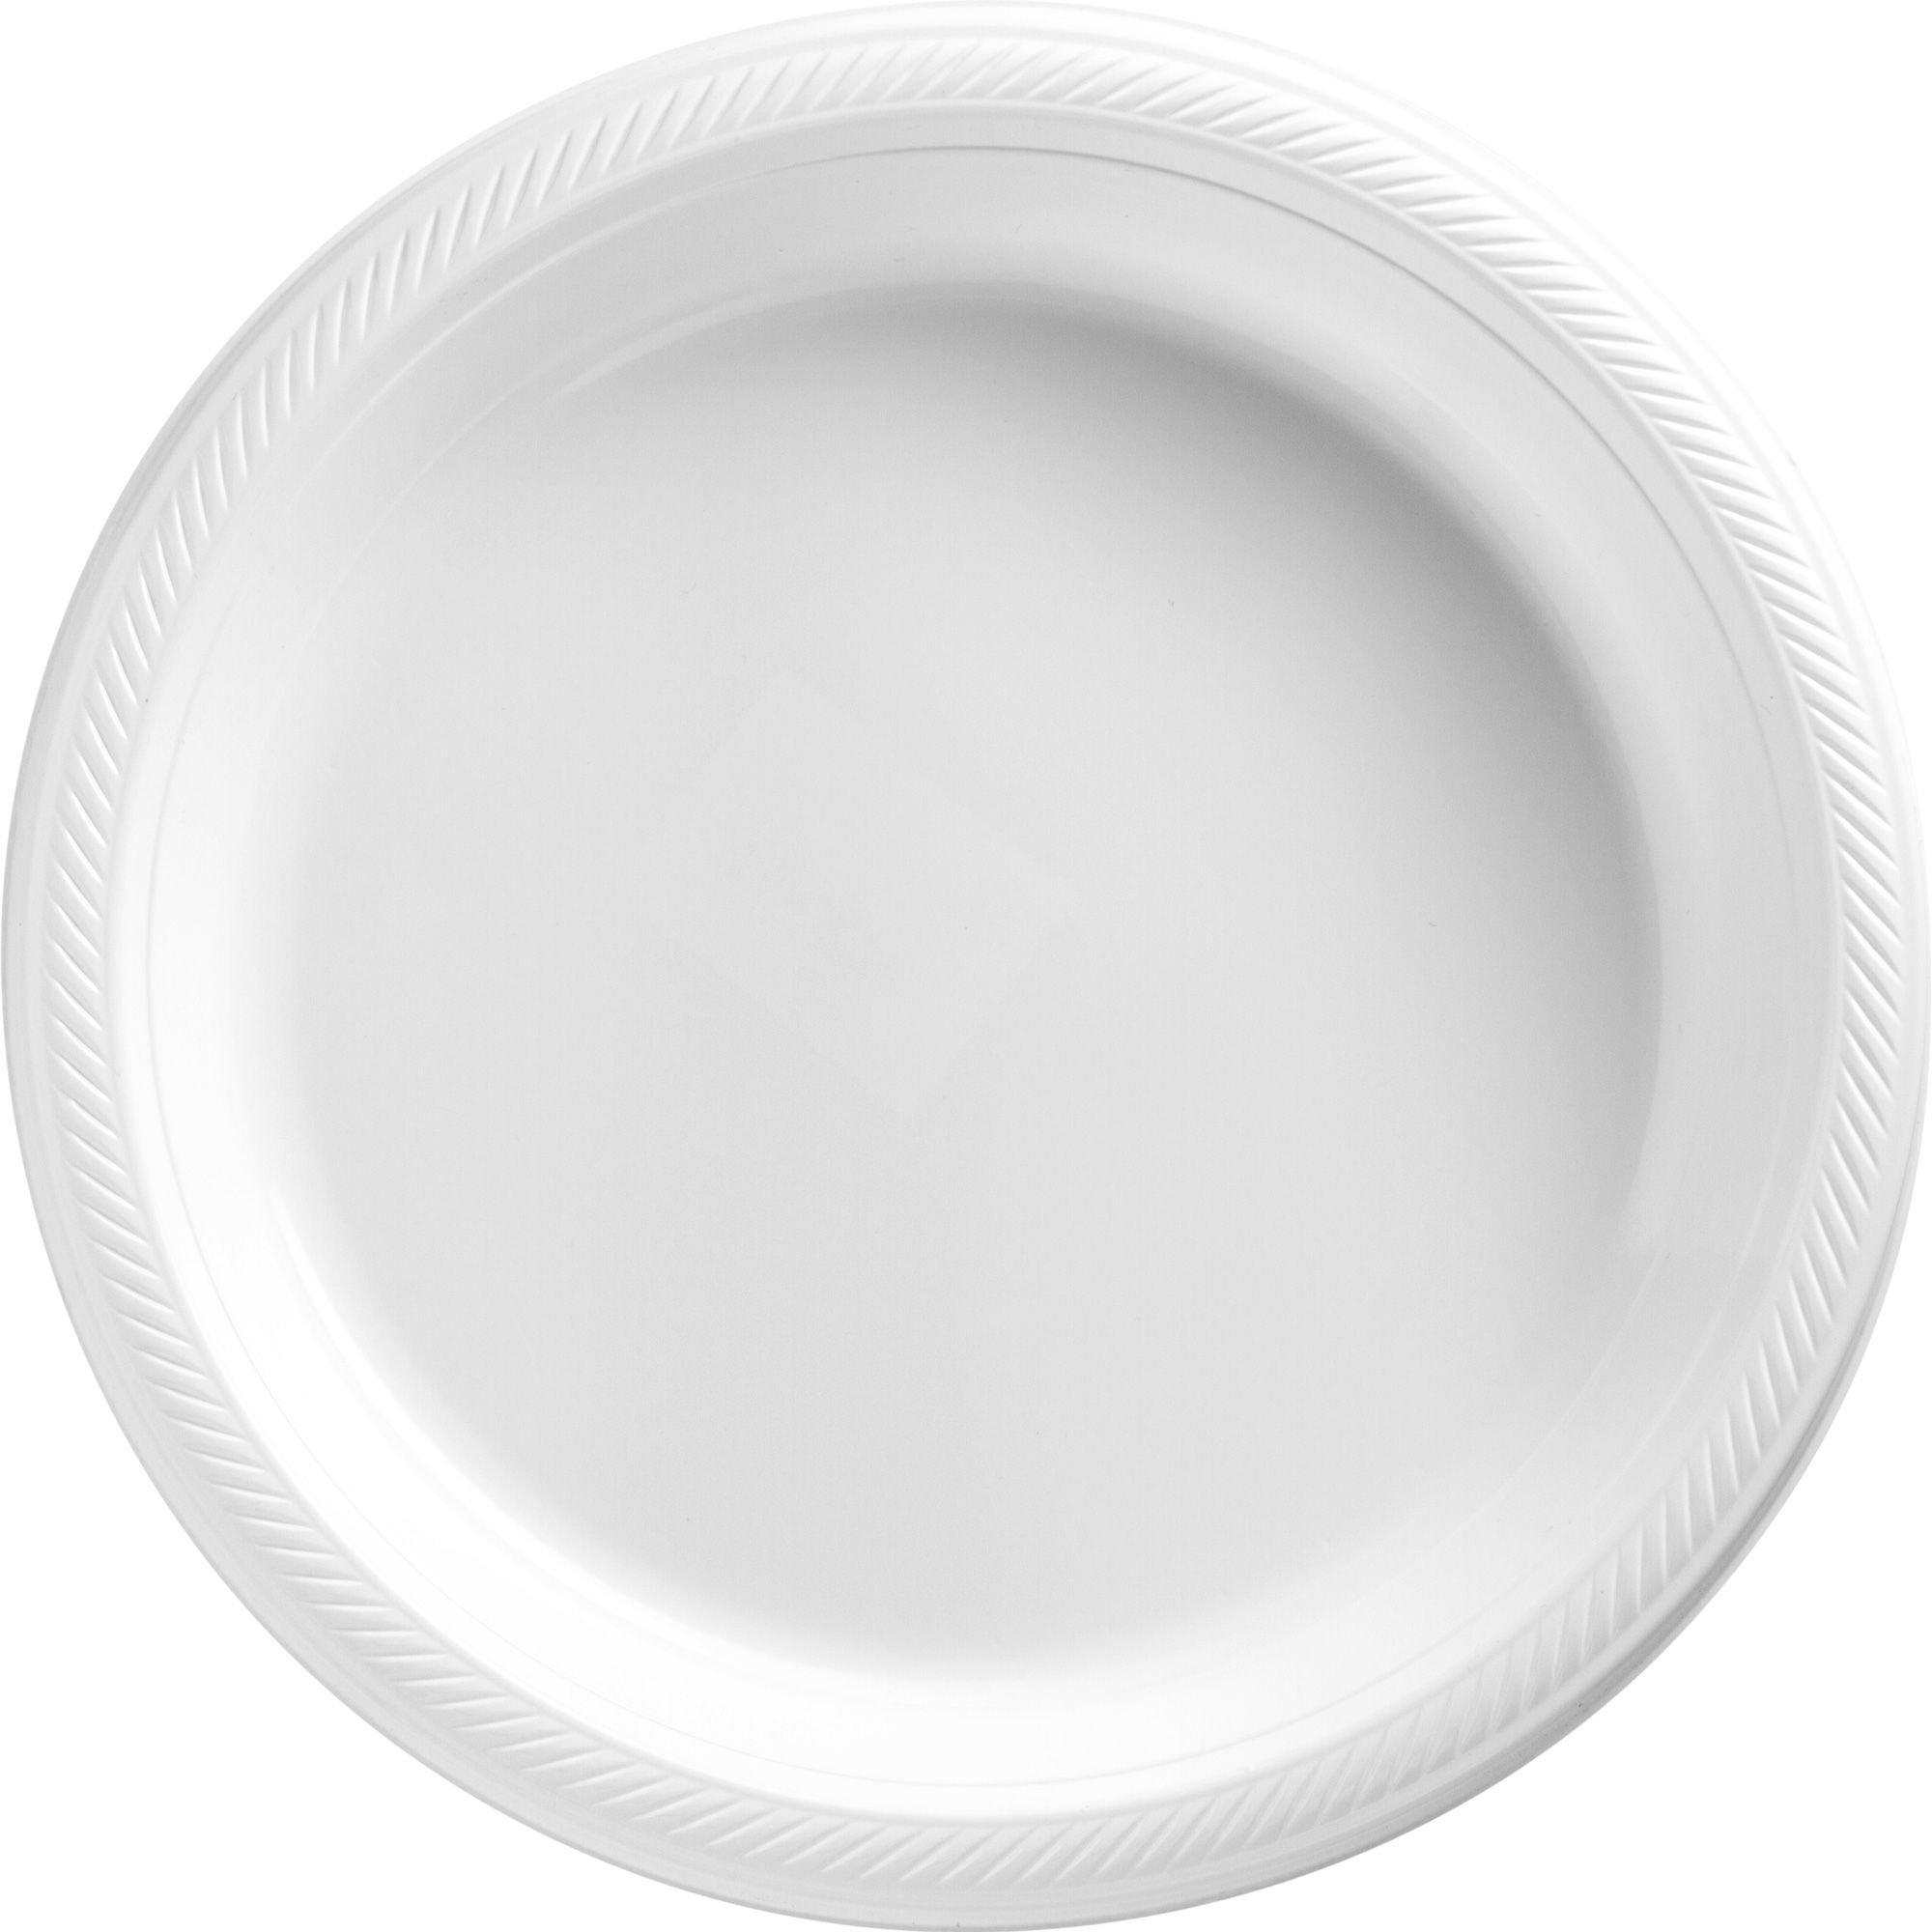 Big Party Pack White Plastic Dinner Plates 50ct | Party City